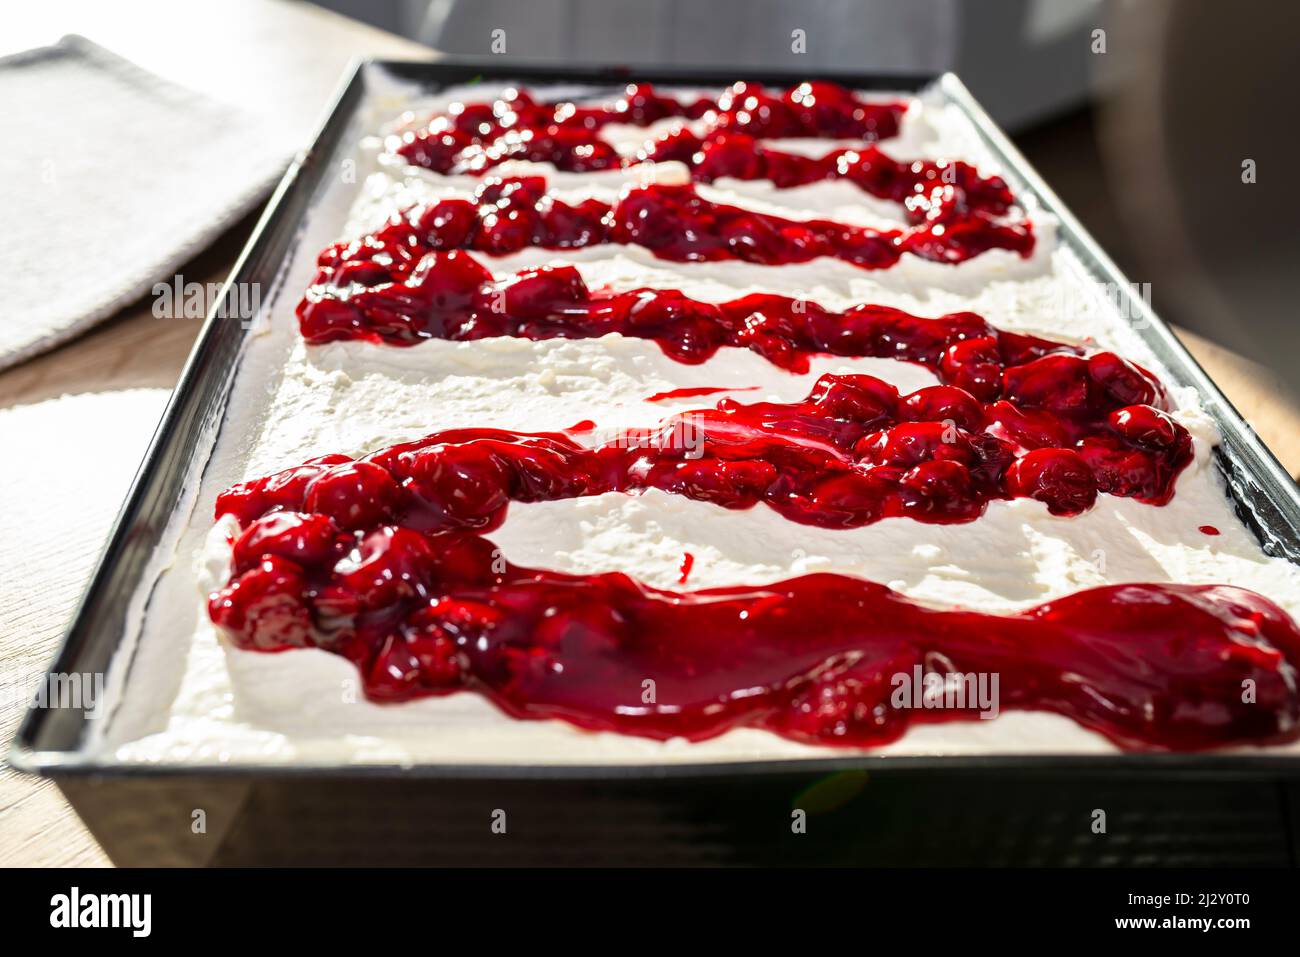 Ready Japanese cake with cottage cheese and whipped cream and fruit cherry sauce. Stock Photo